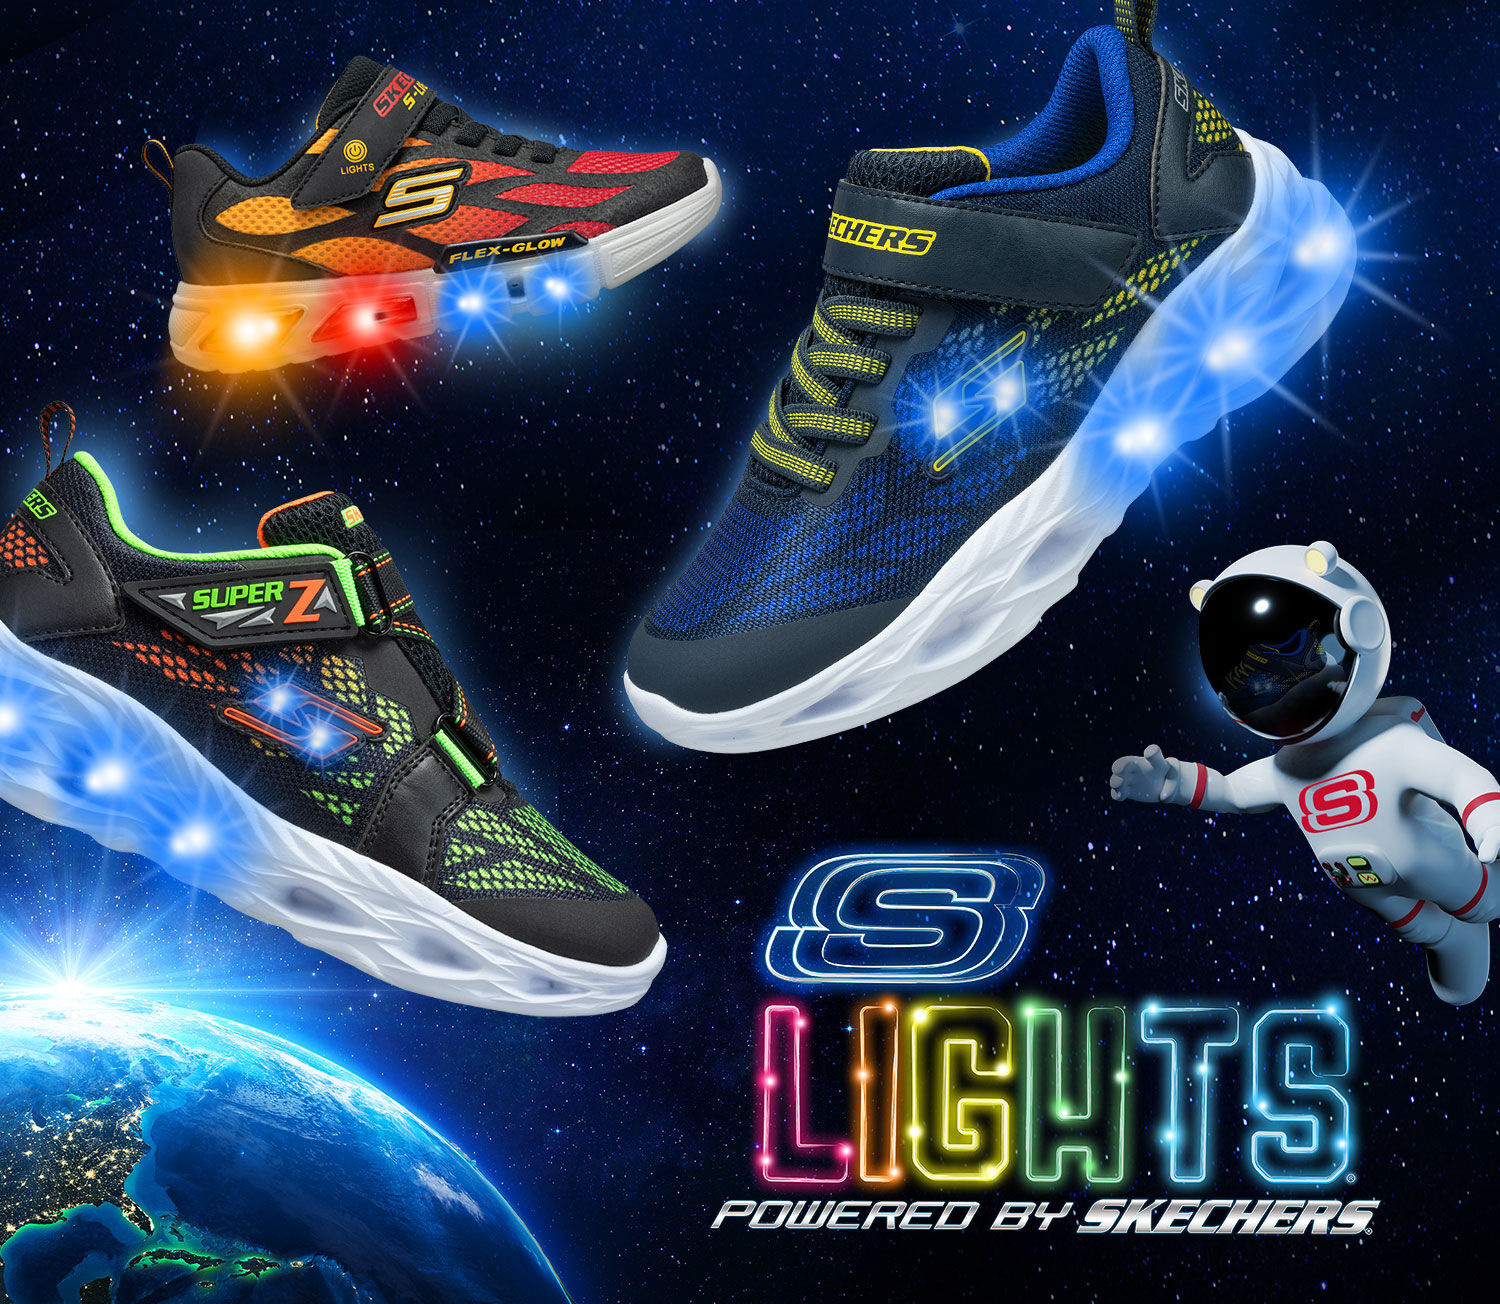 s lights powered by skechers